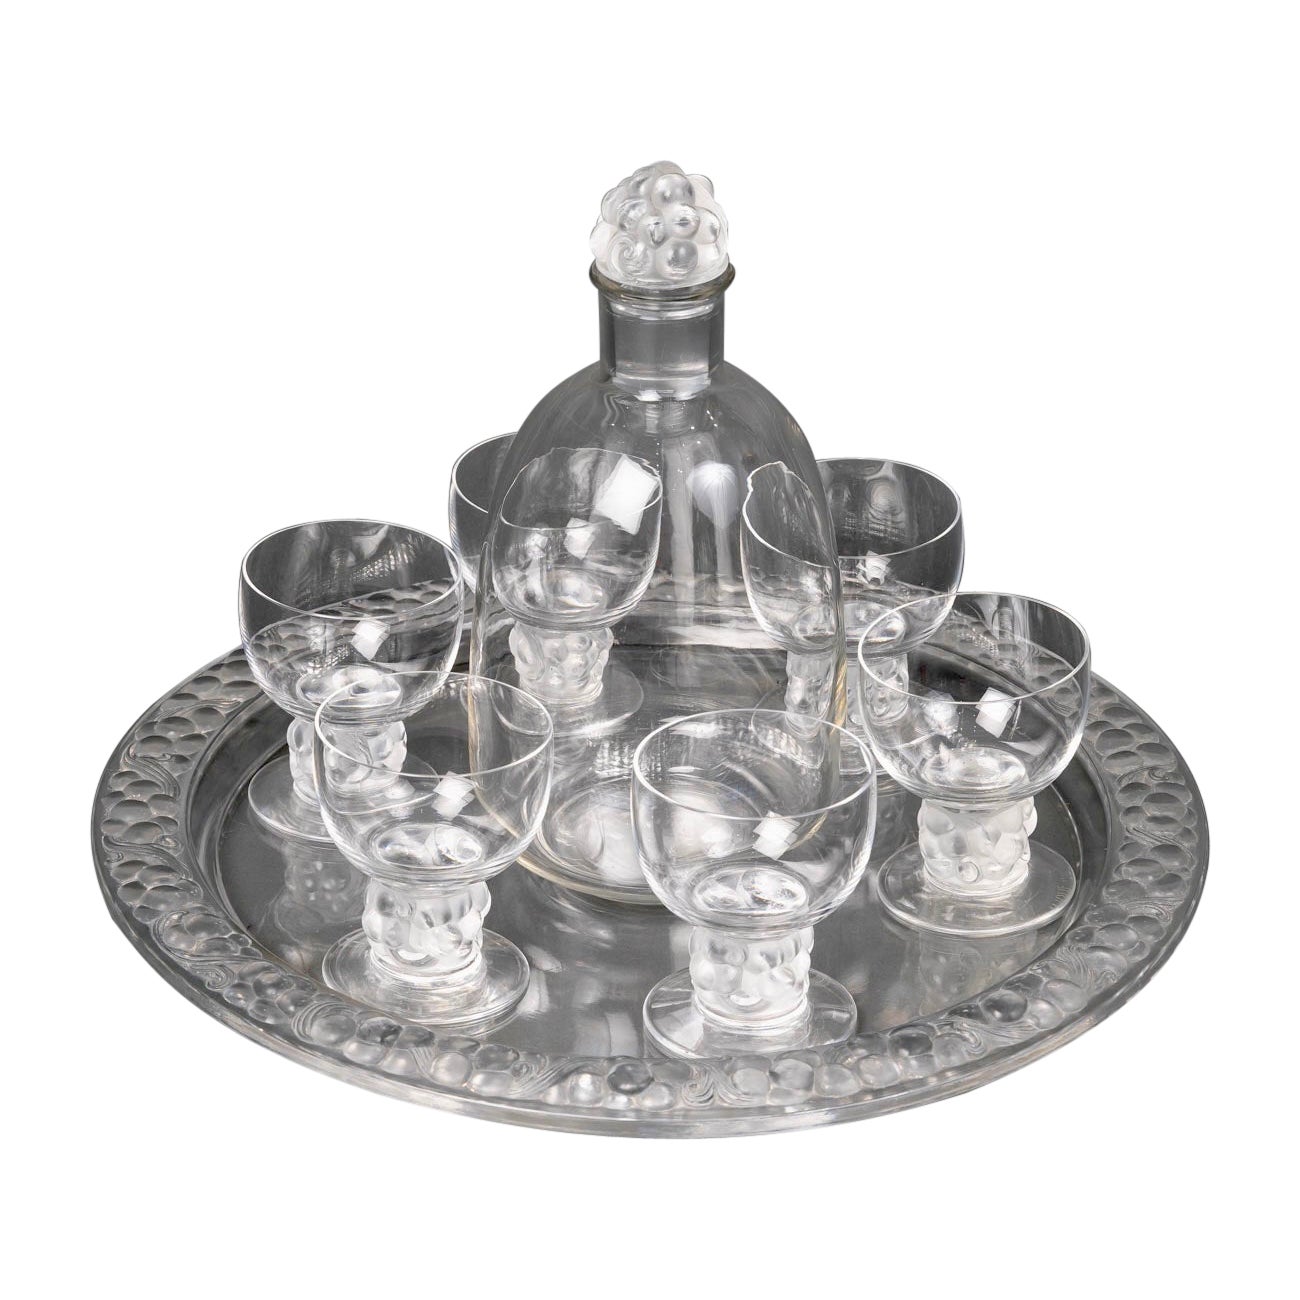 1931 Rene Lalique Set of Thomery 6 Glasses, Tray and Decanter For Sale